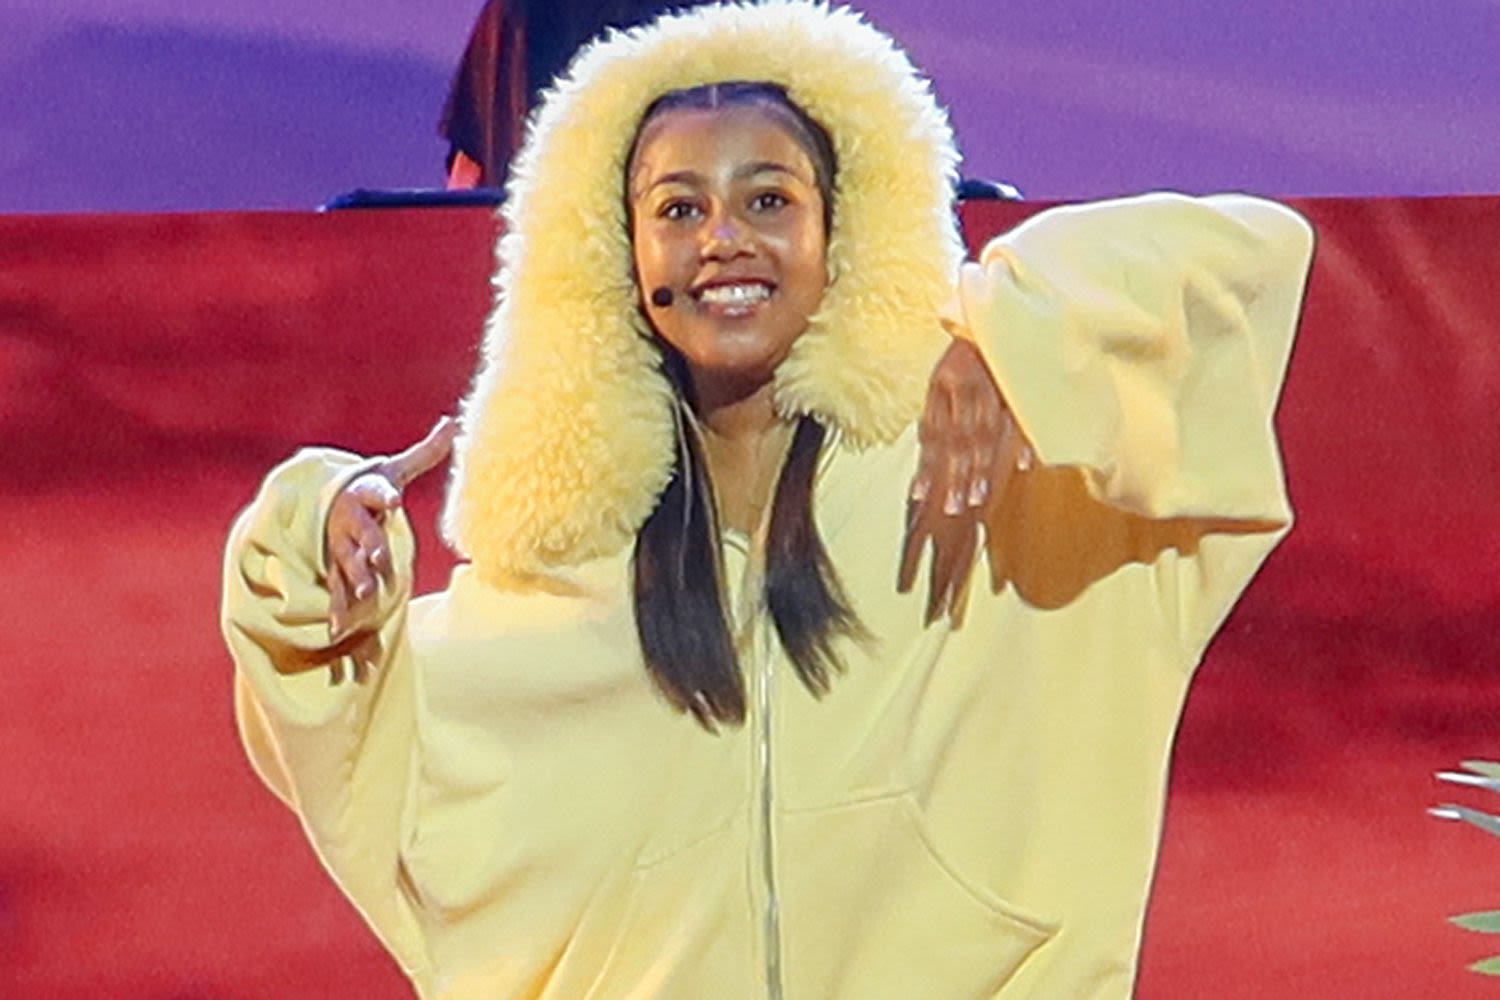 North West Performs ‘I Just Can’t Wait to Be King’ as Young Simba During 'The Lion King' Live Concert